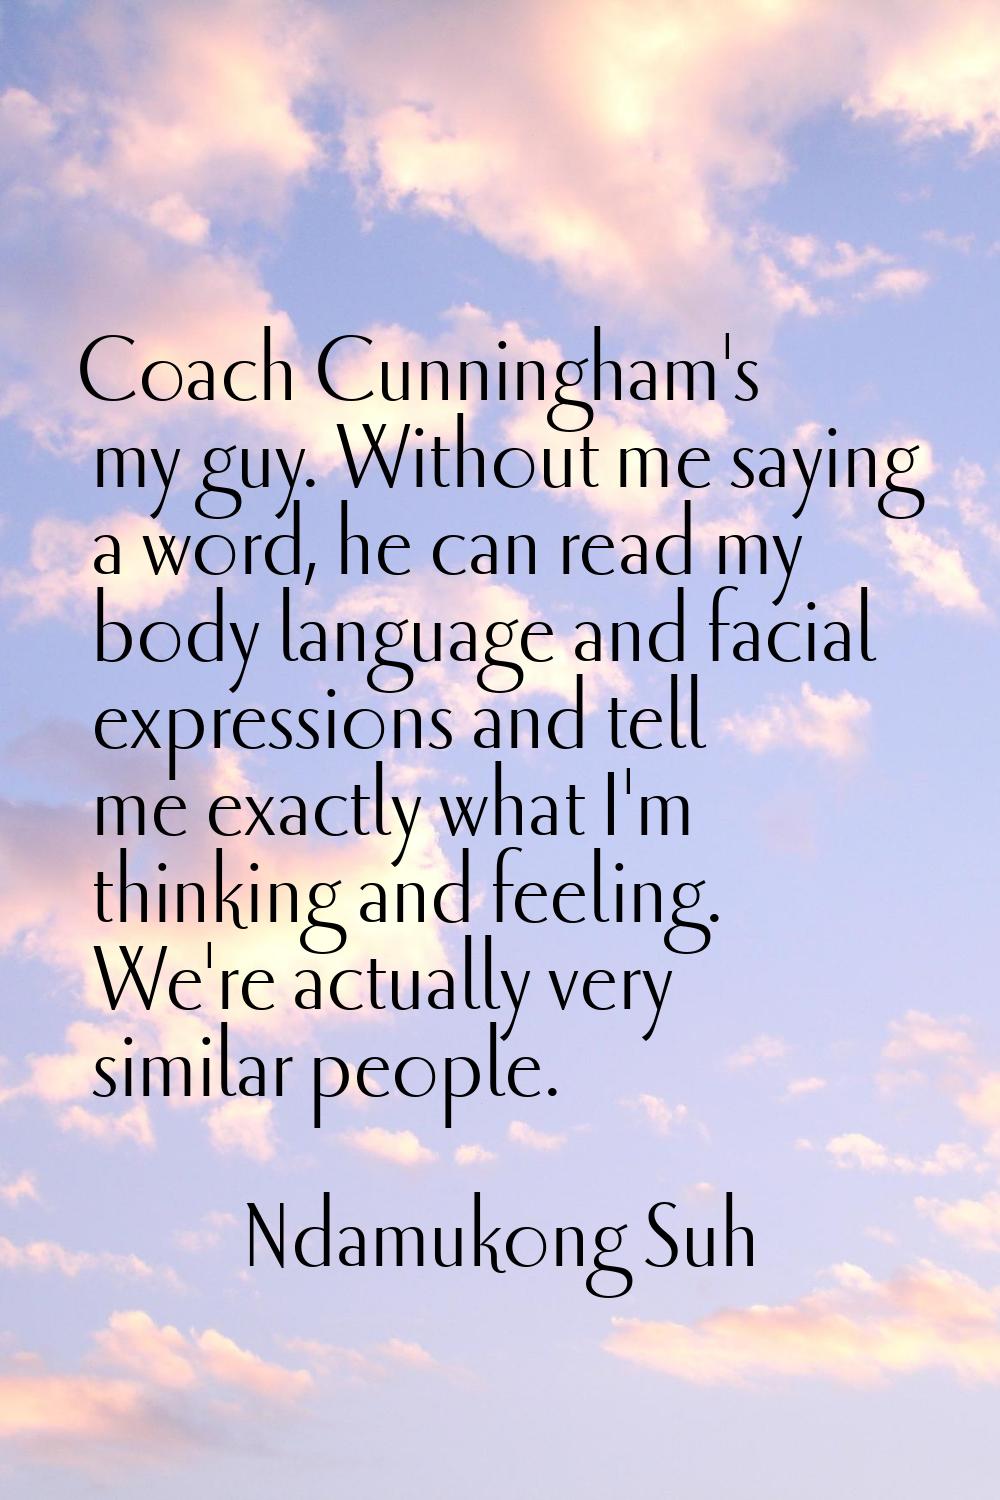 Coach Cunningham's my guy. Without me saying a word, he can read my body language and facial expres